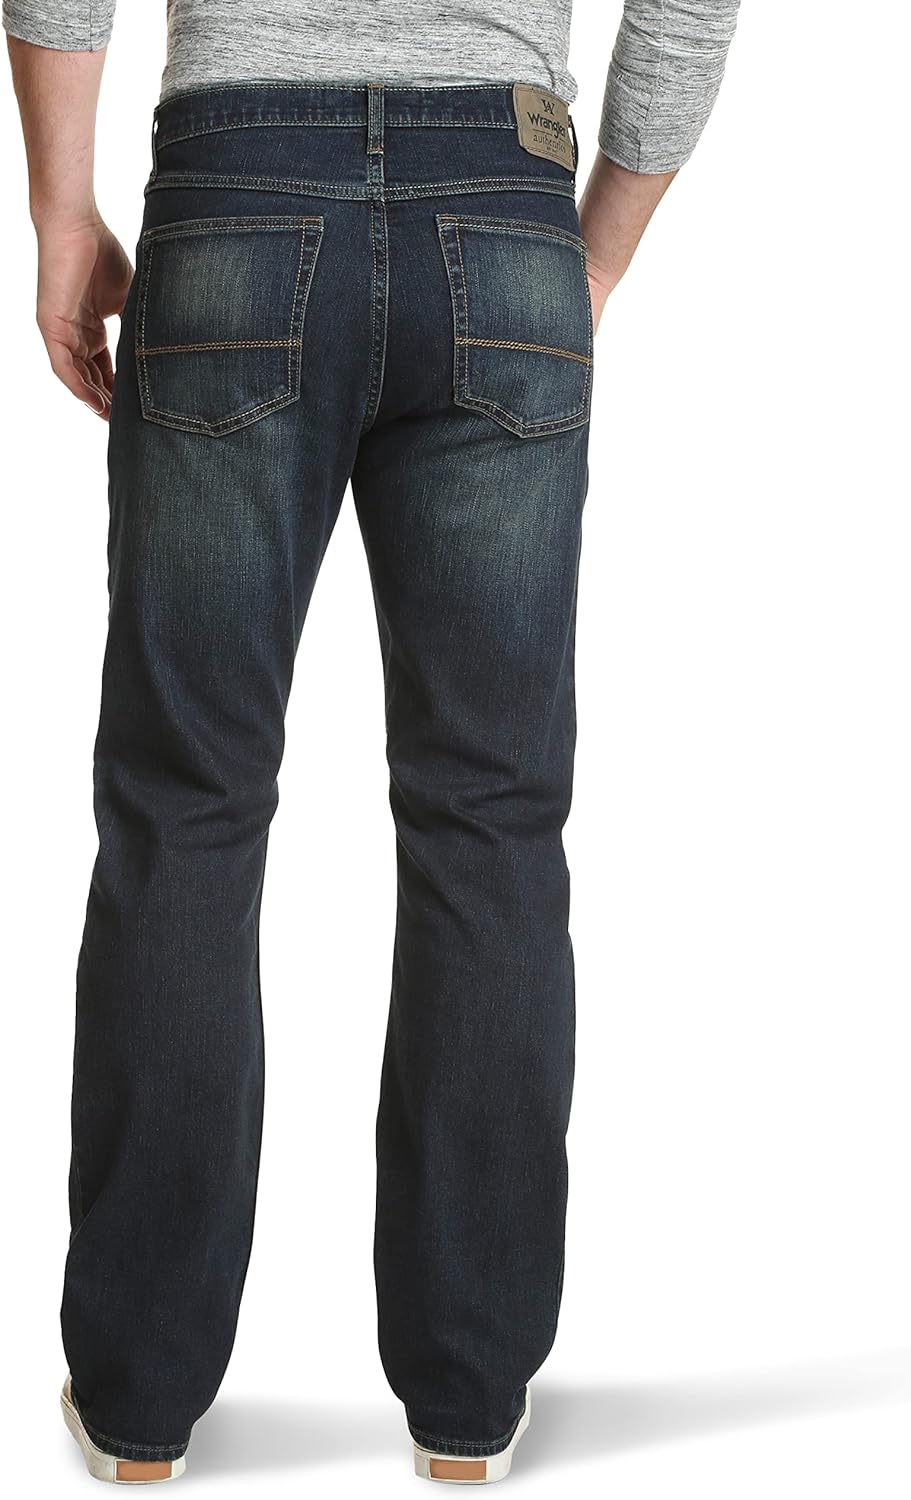 Wrangler Authentics Men’s Relaxed Fit Boot Cut Jean